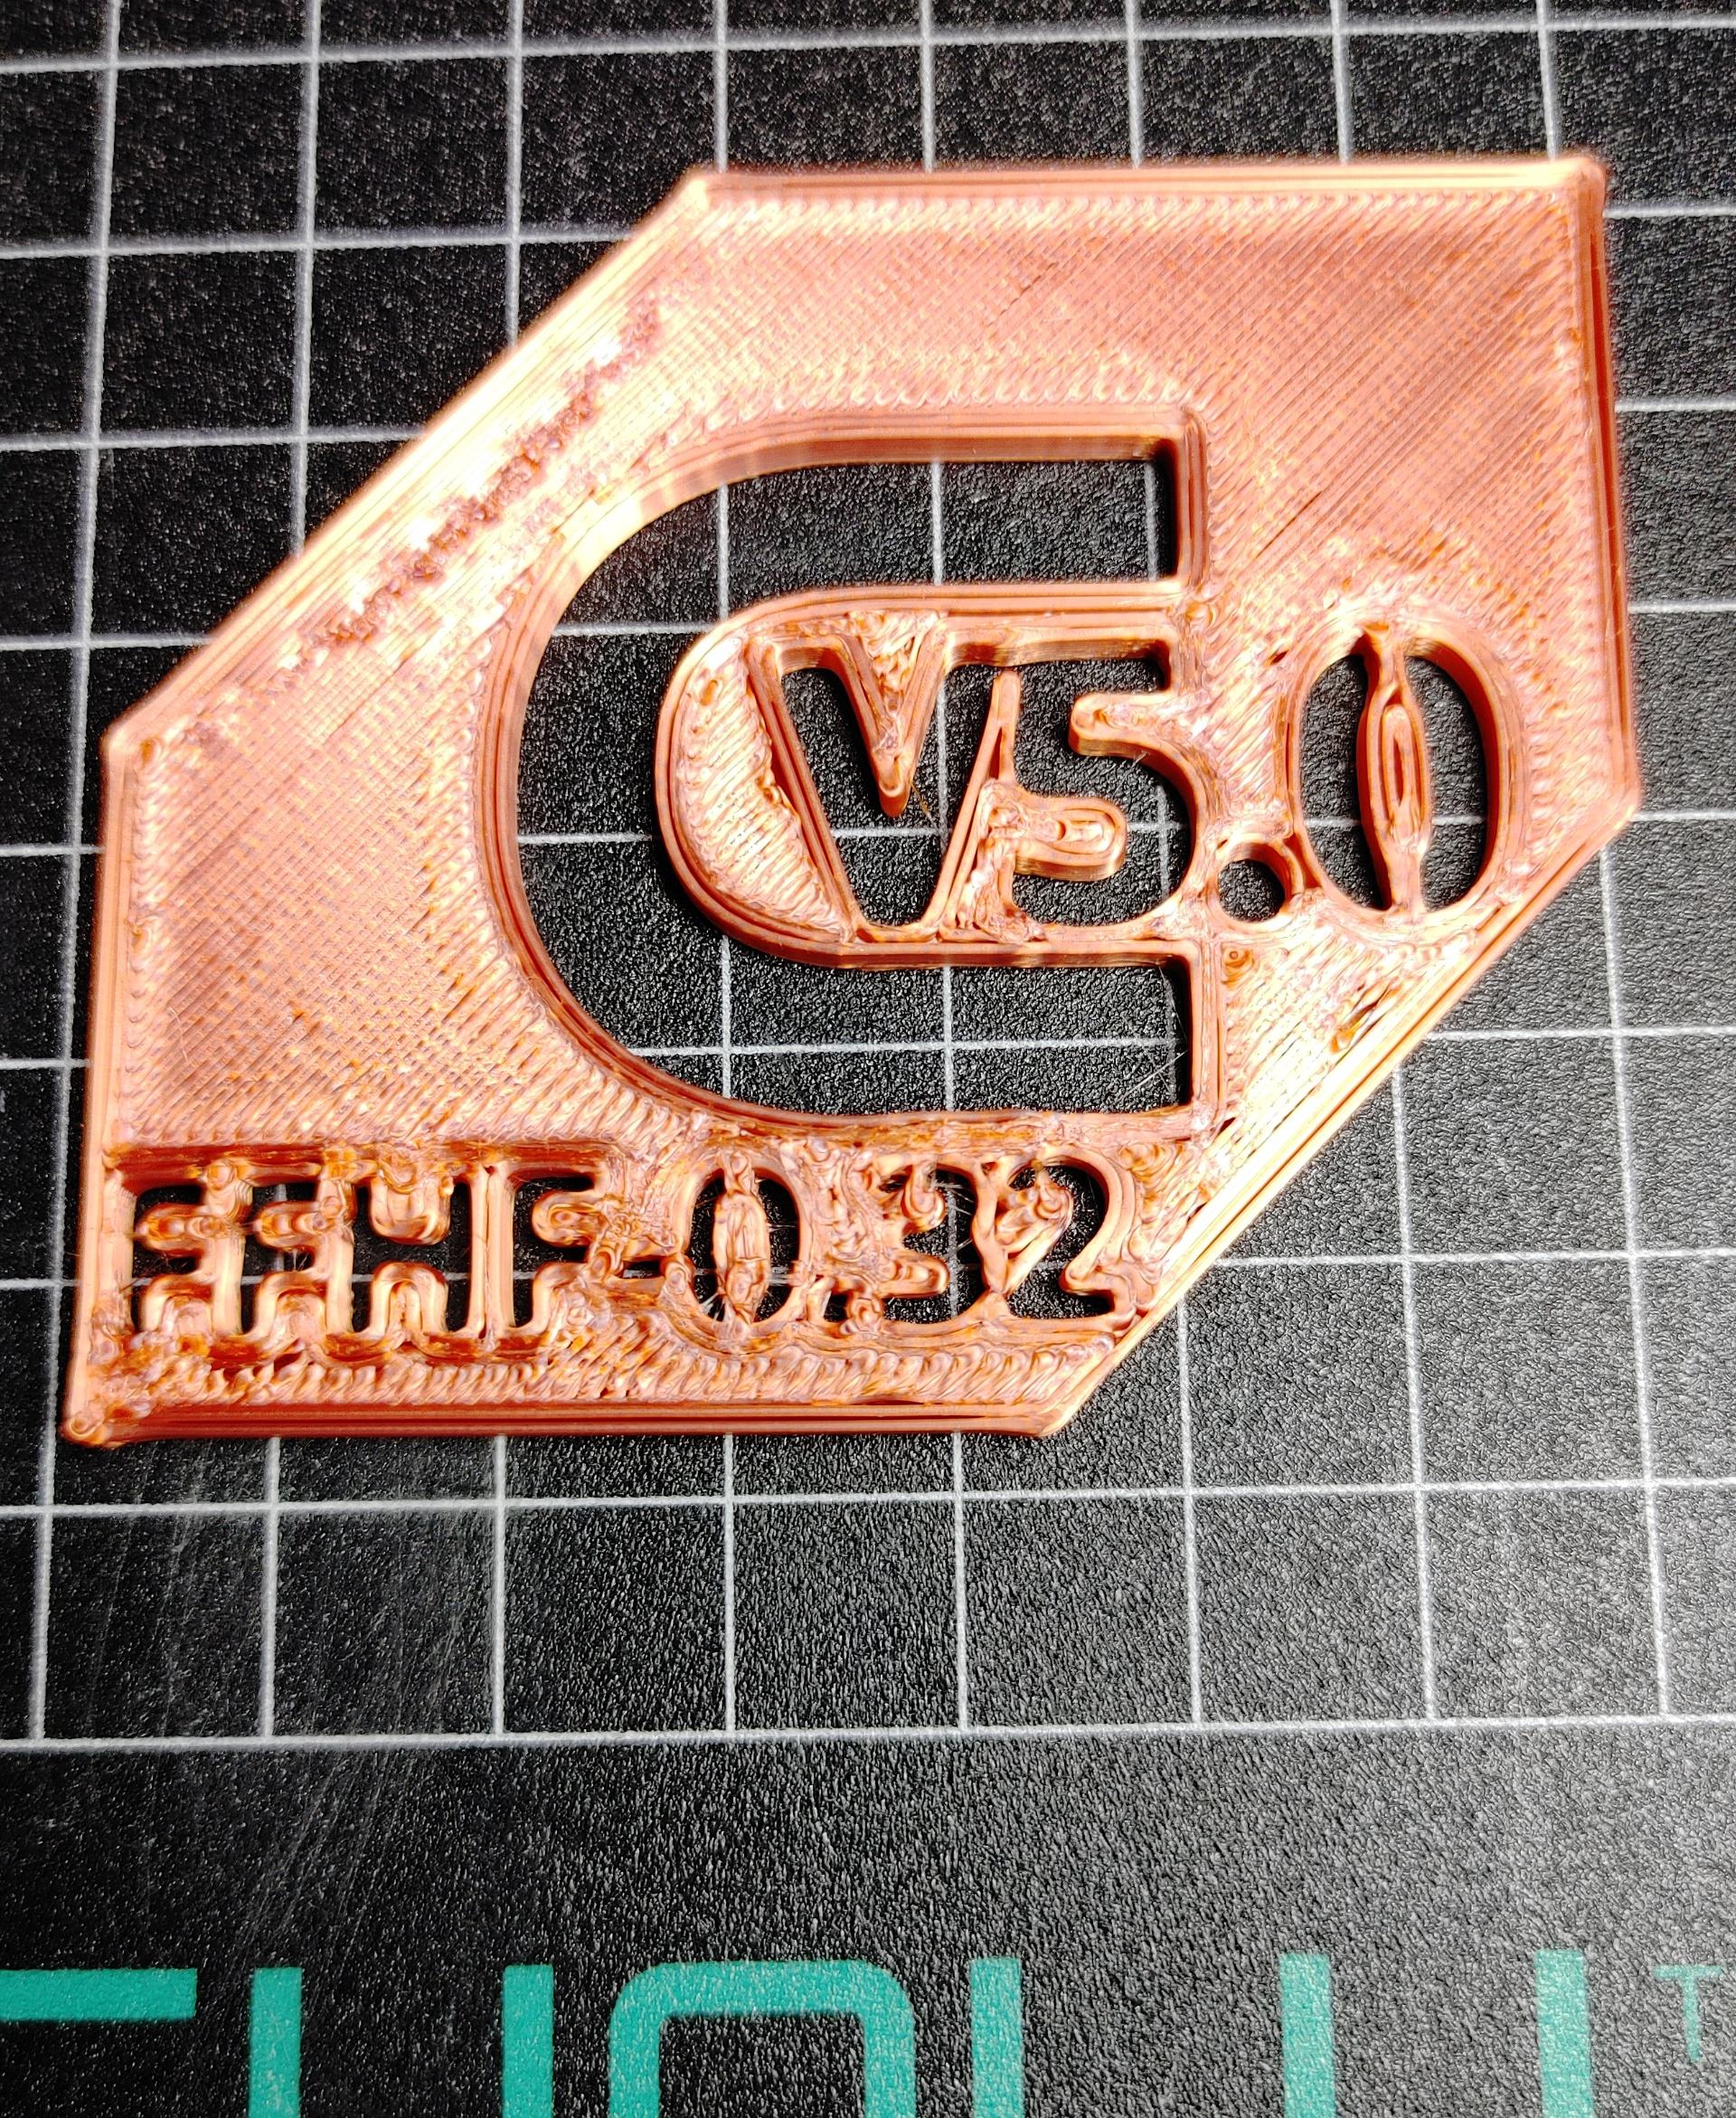 Ver3.4 Cura V5.0 Filament Friday HyperFast Profile - hello chep . thank's for the profile it work's. this was printed on my ender 2 pro - 3d model